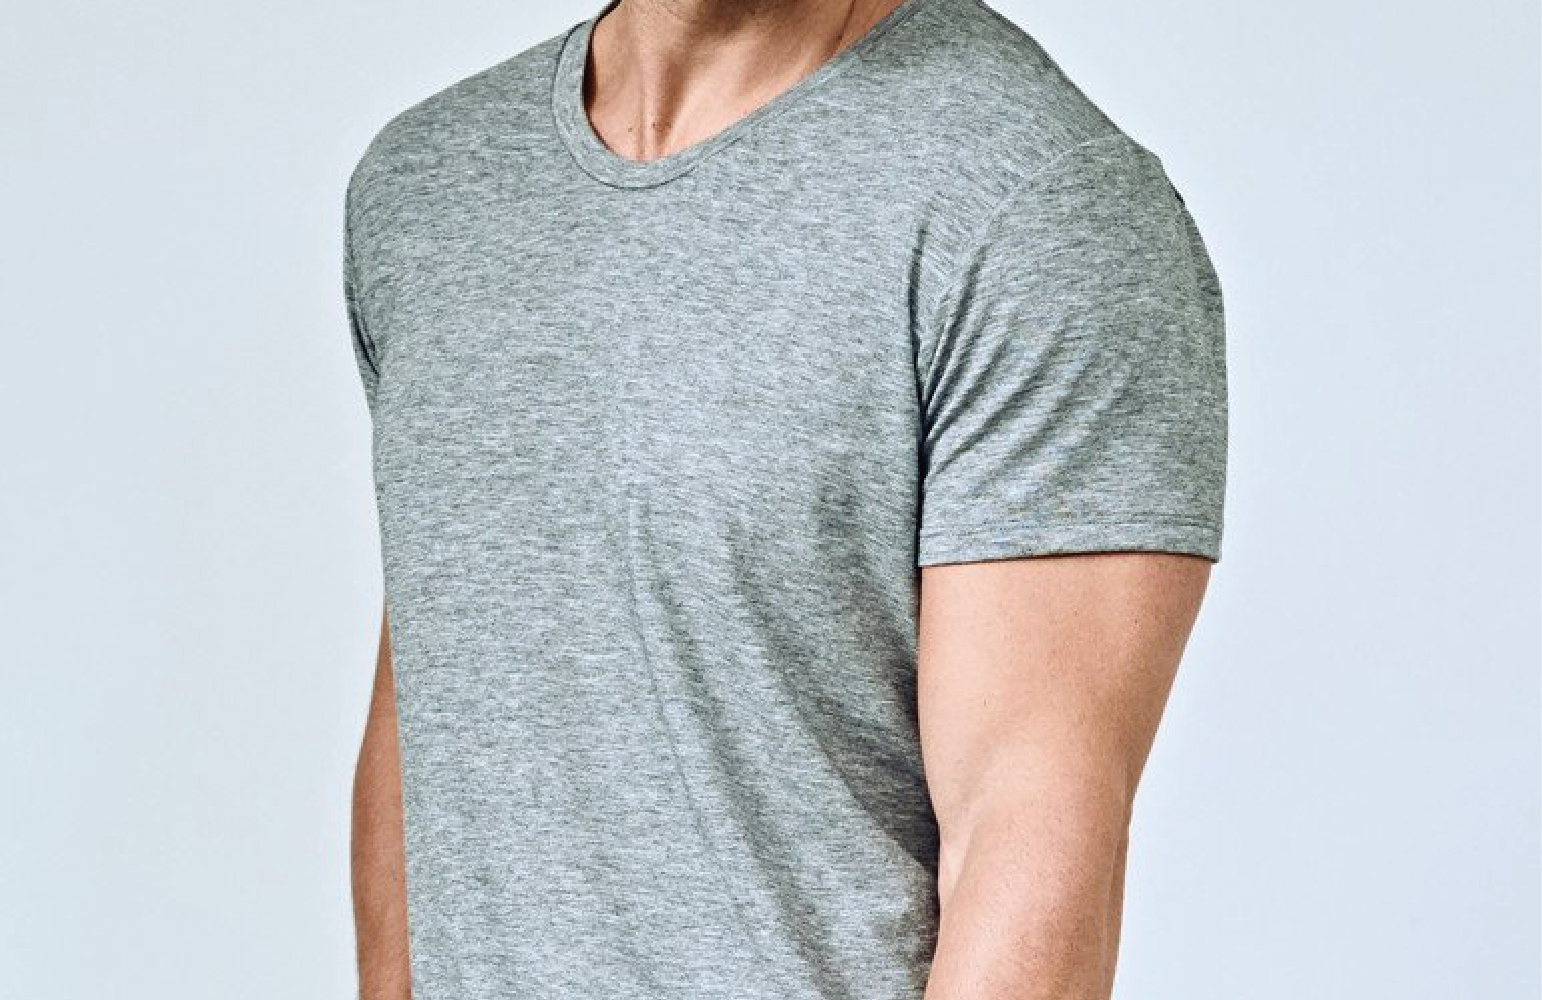 The Scoop Neck style T shirt